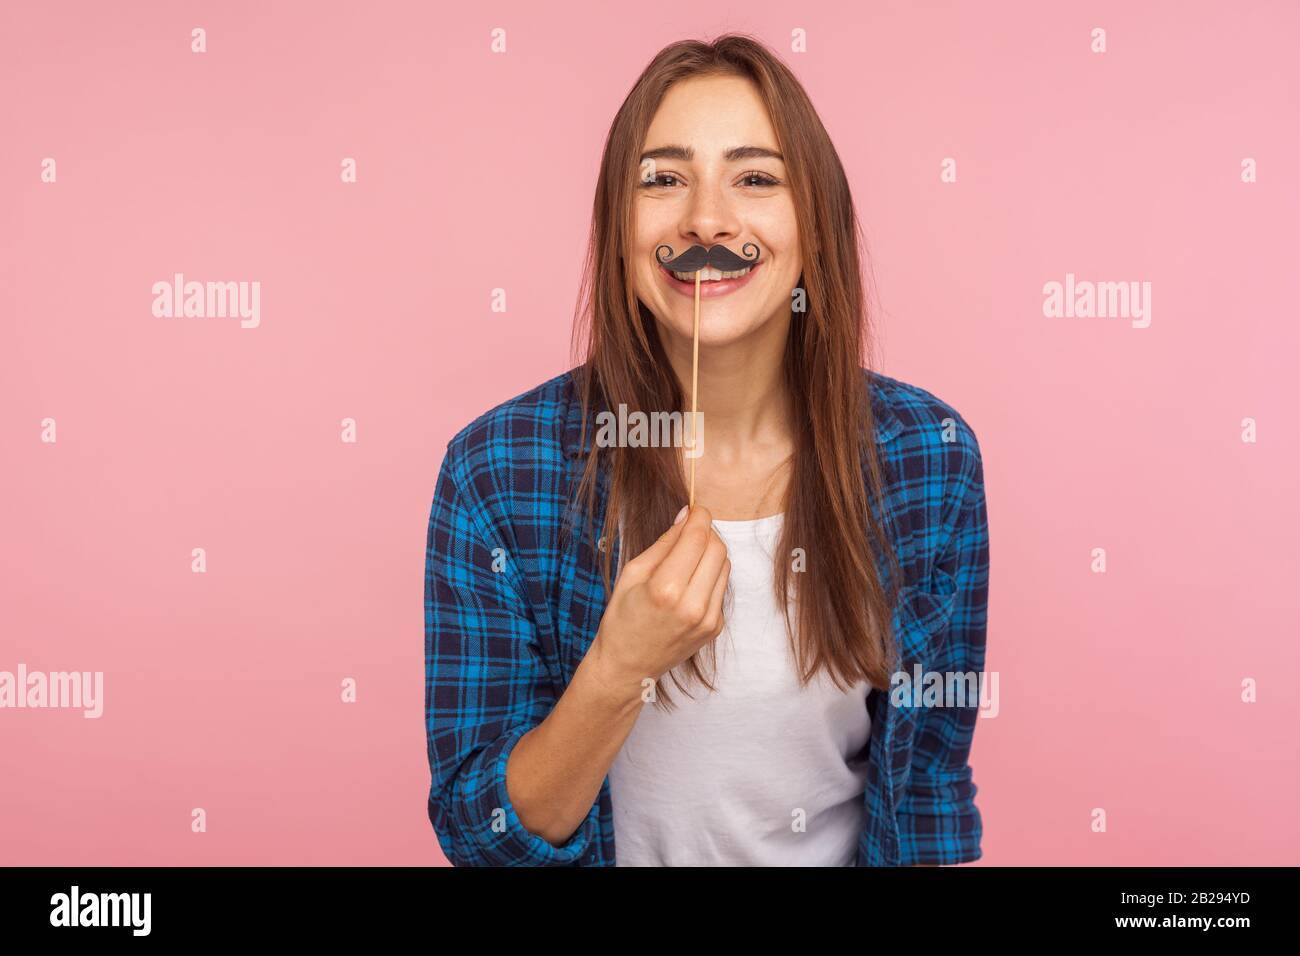 Portrait of cheerful playful girl in checkered shirt holding fake curled mustache on stick and smiling to camera, having fun, wearing masquerade acces Stock Photo